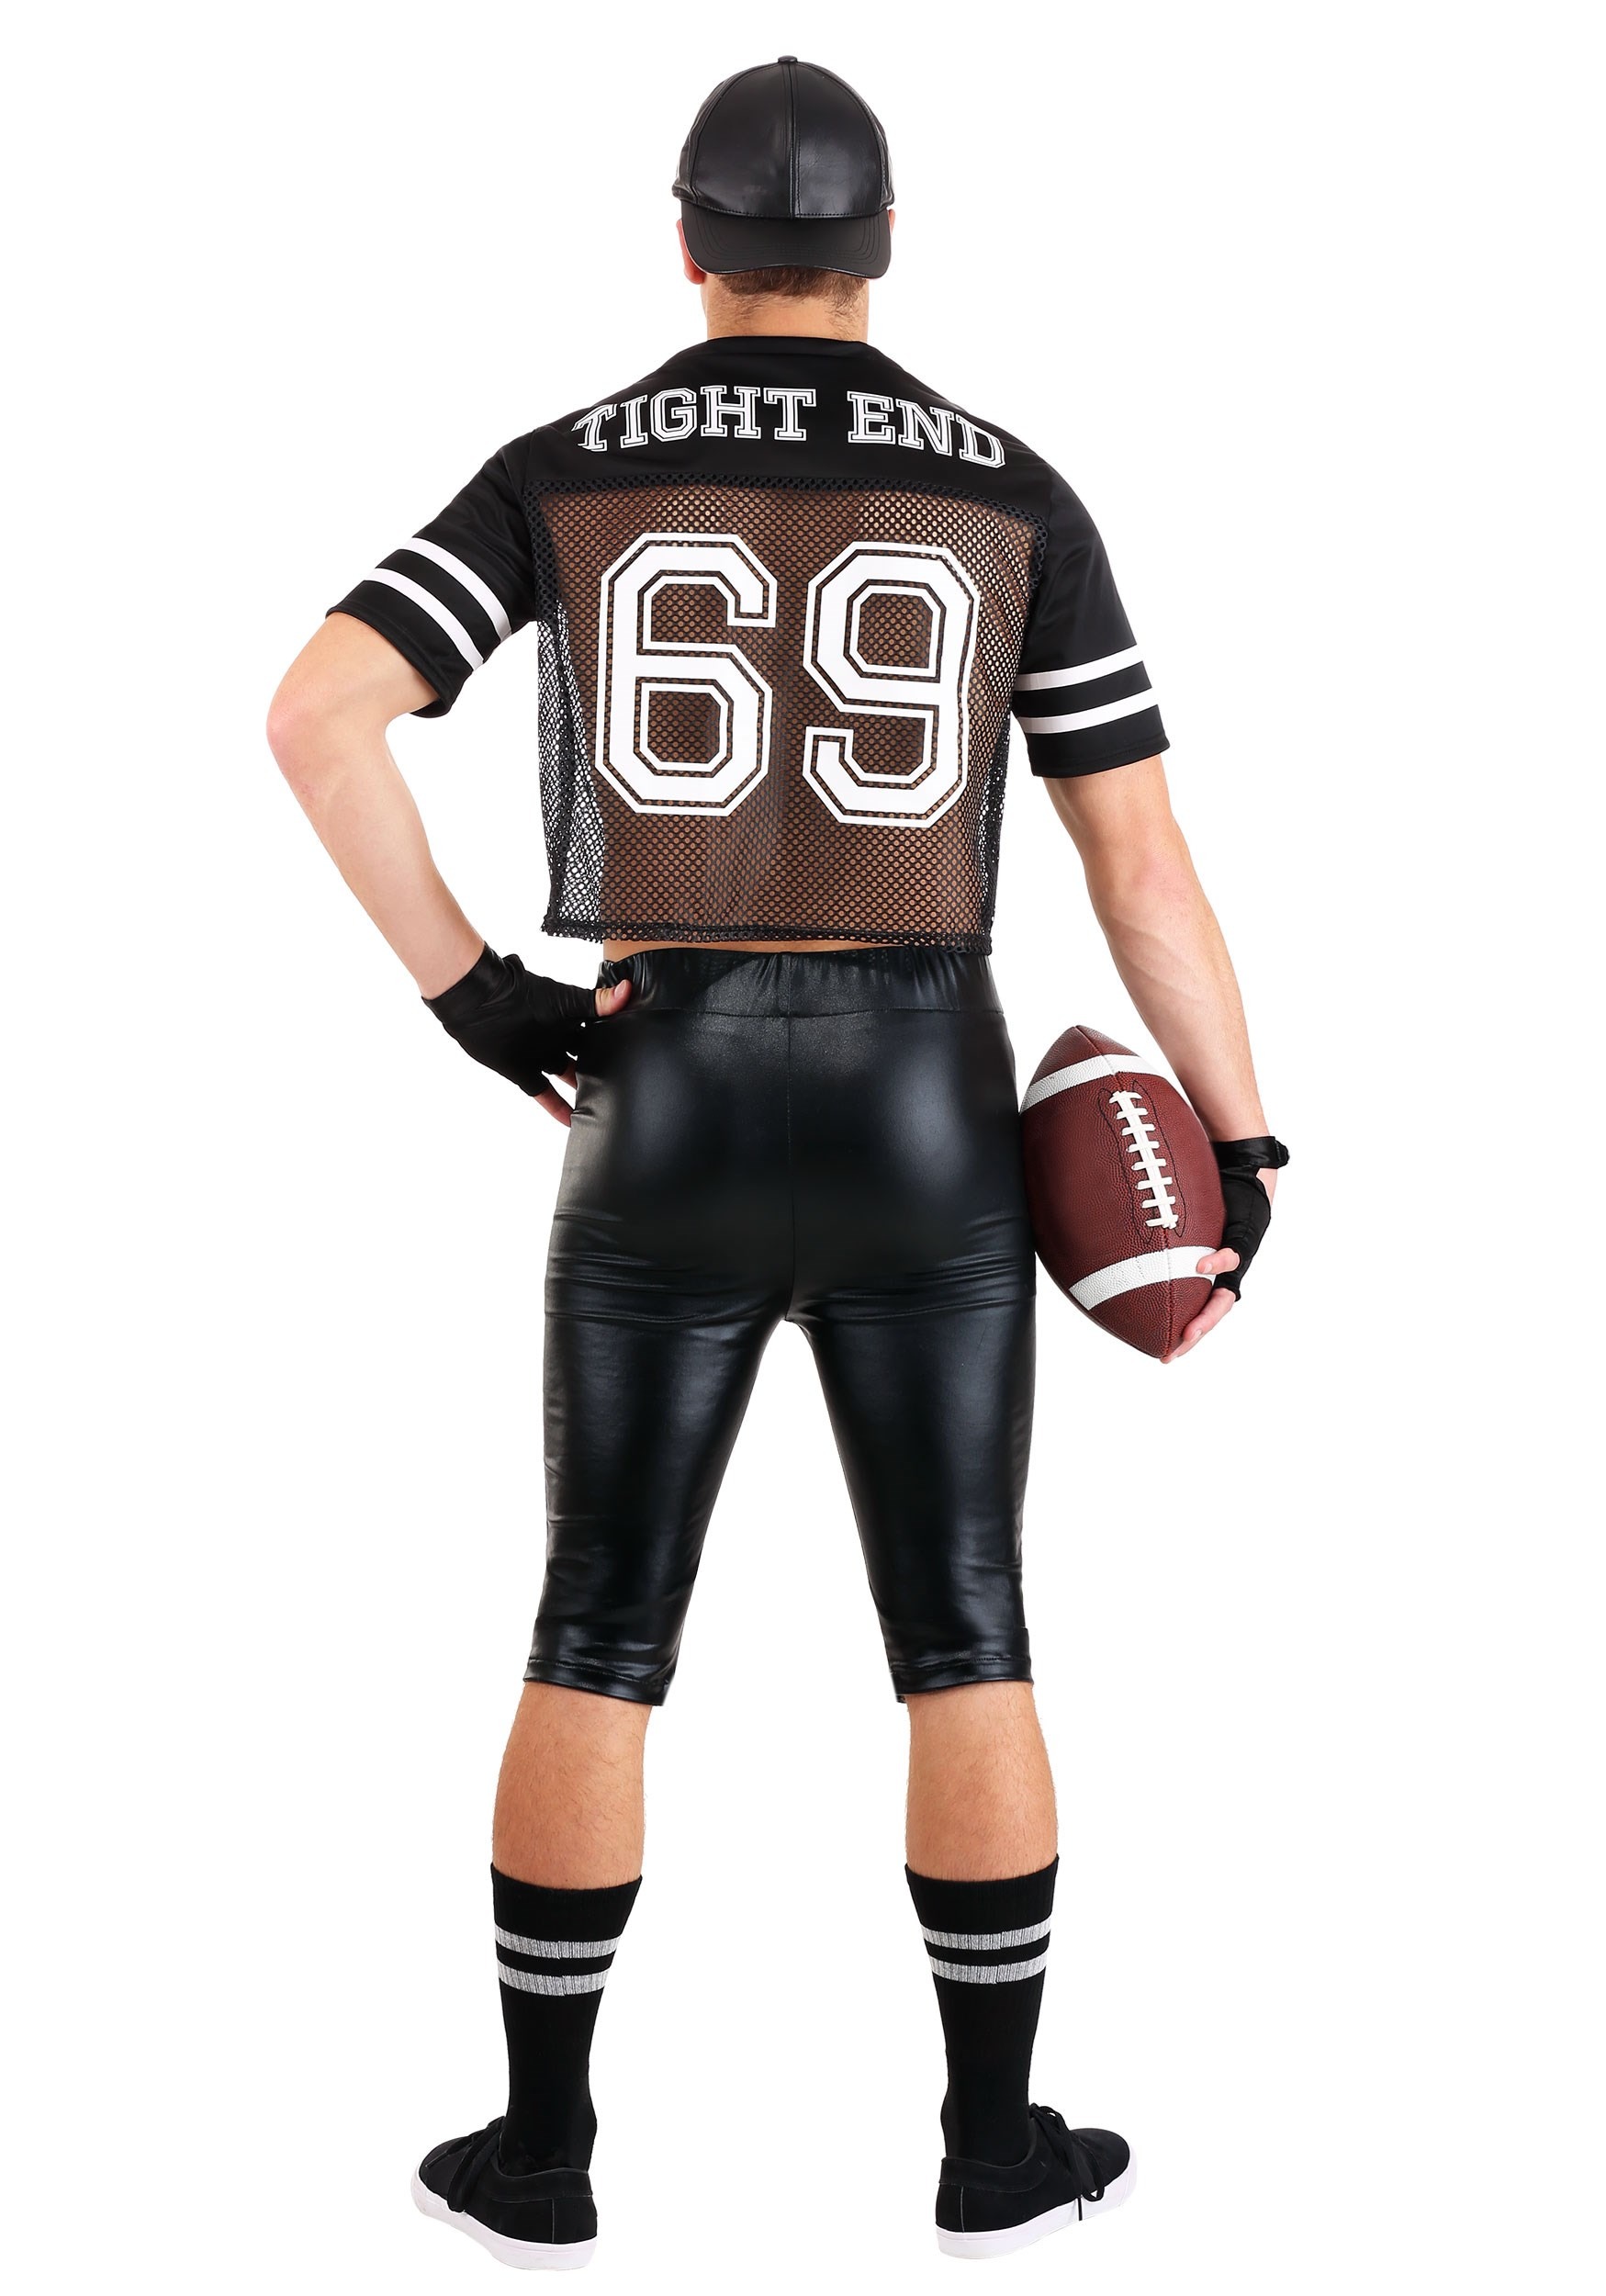 Tight End Footballer Costume For Adults